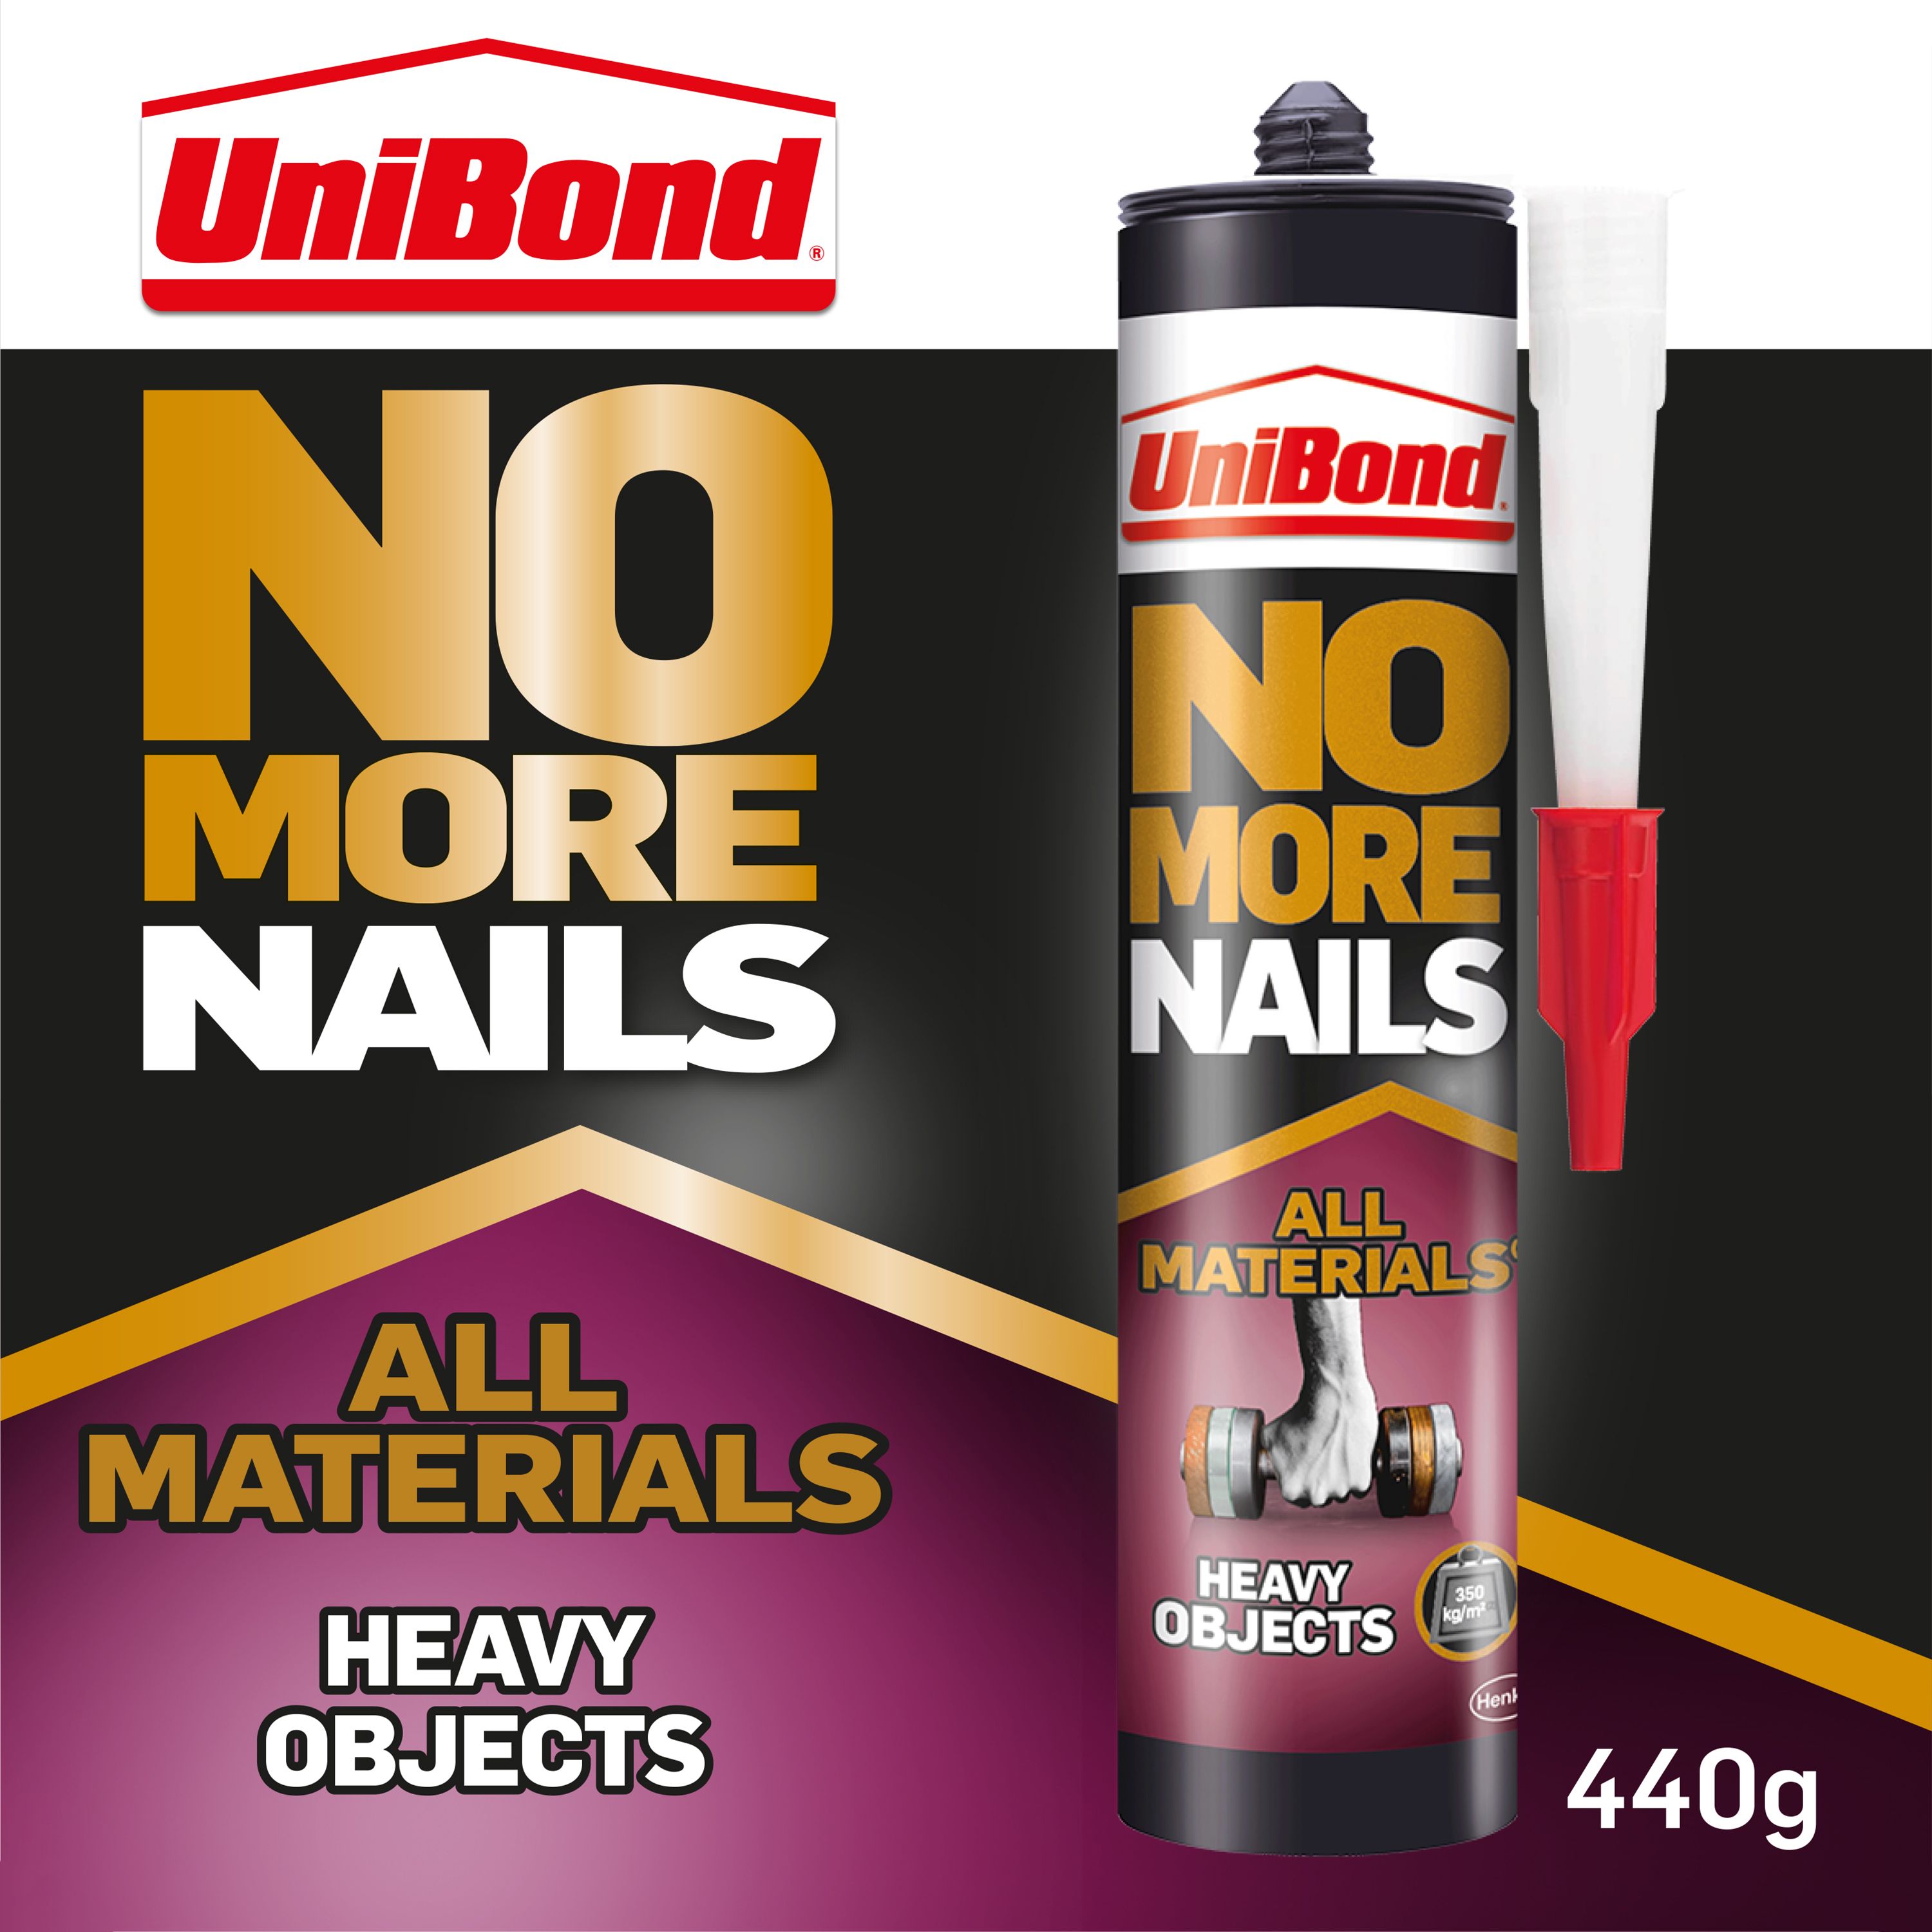 UniBond No More Nails Heavy Objects White All materials Grab adhesive 440g